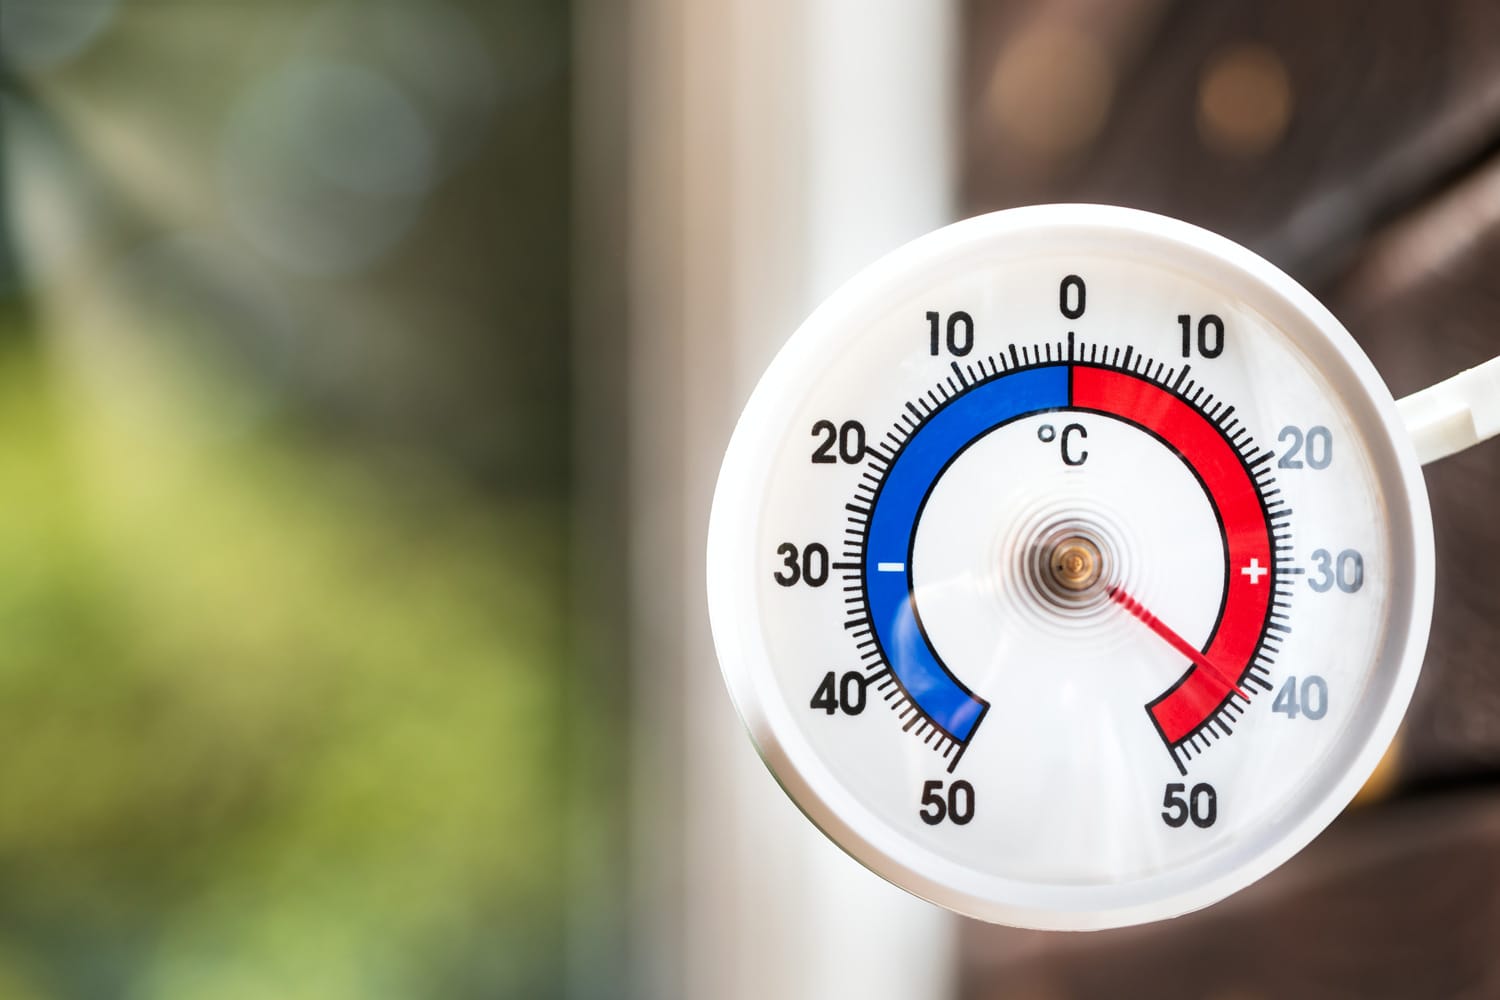 Outdoor thermometer with celsius scale shows extreme hot temperature 42 degree - summer heatwave concept